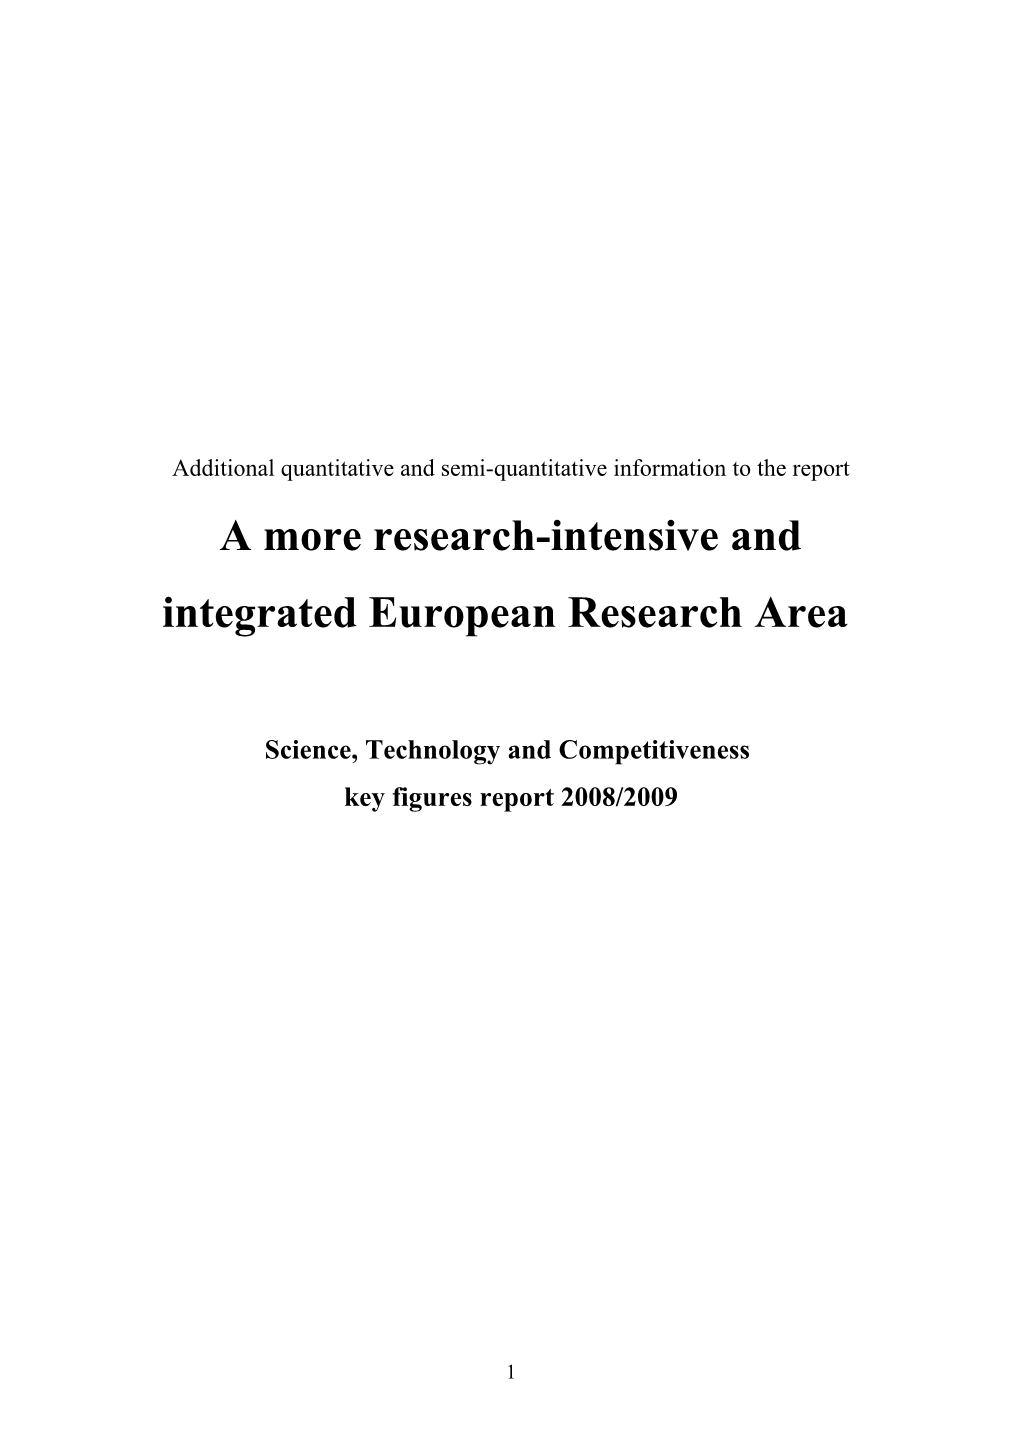 A More Research-Intensive and Integrated European Research Area